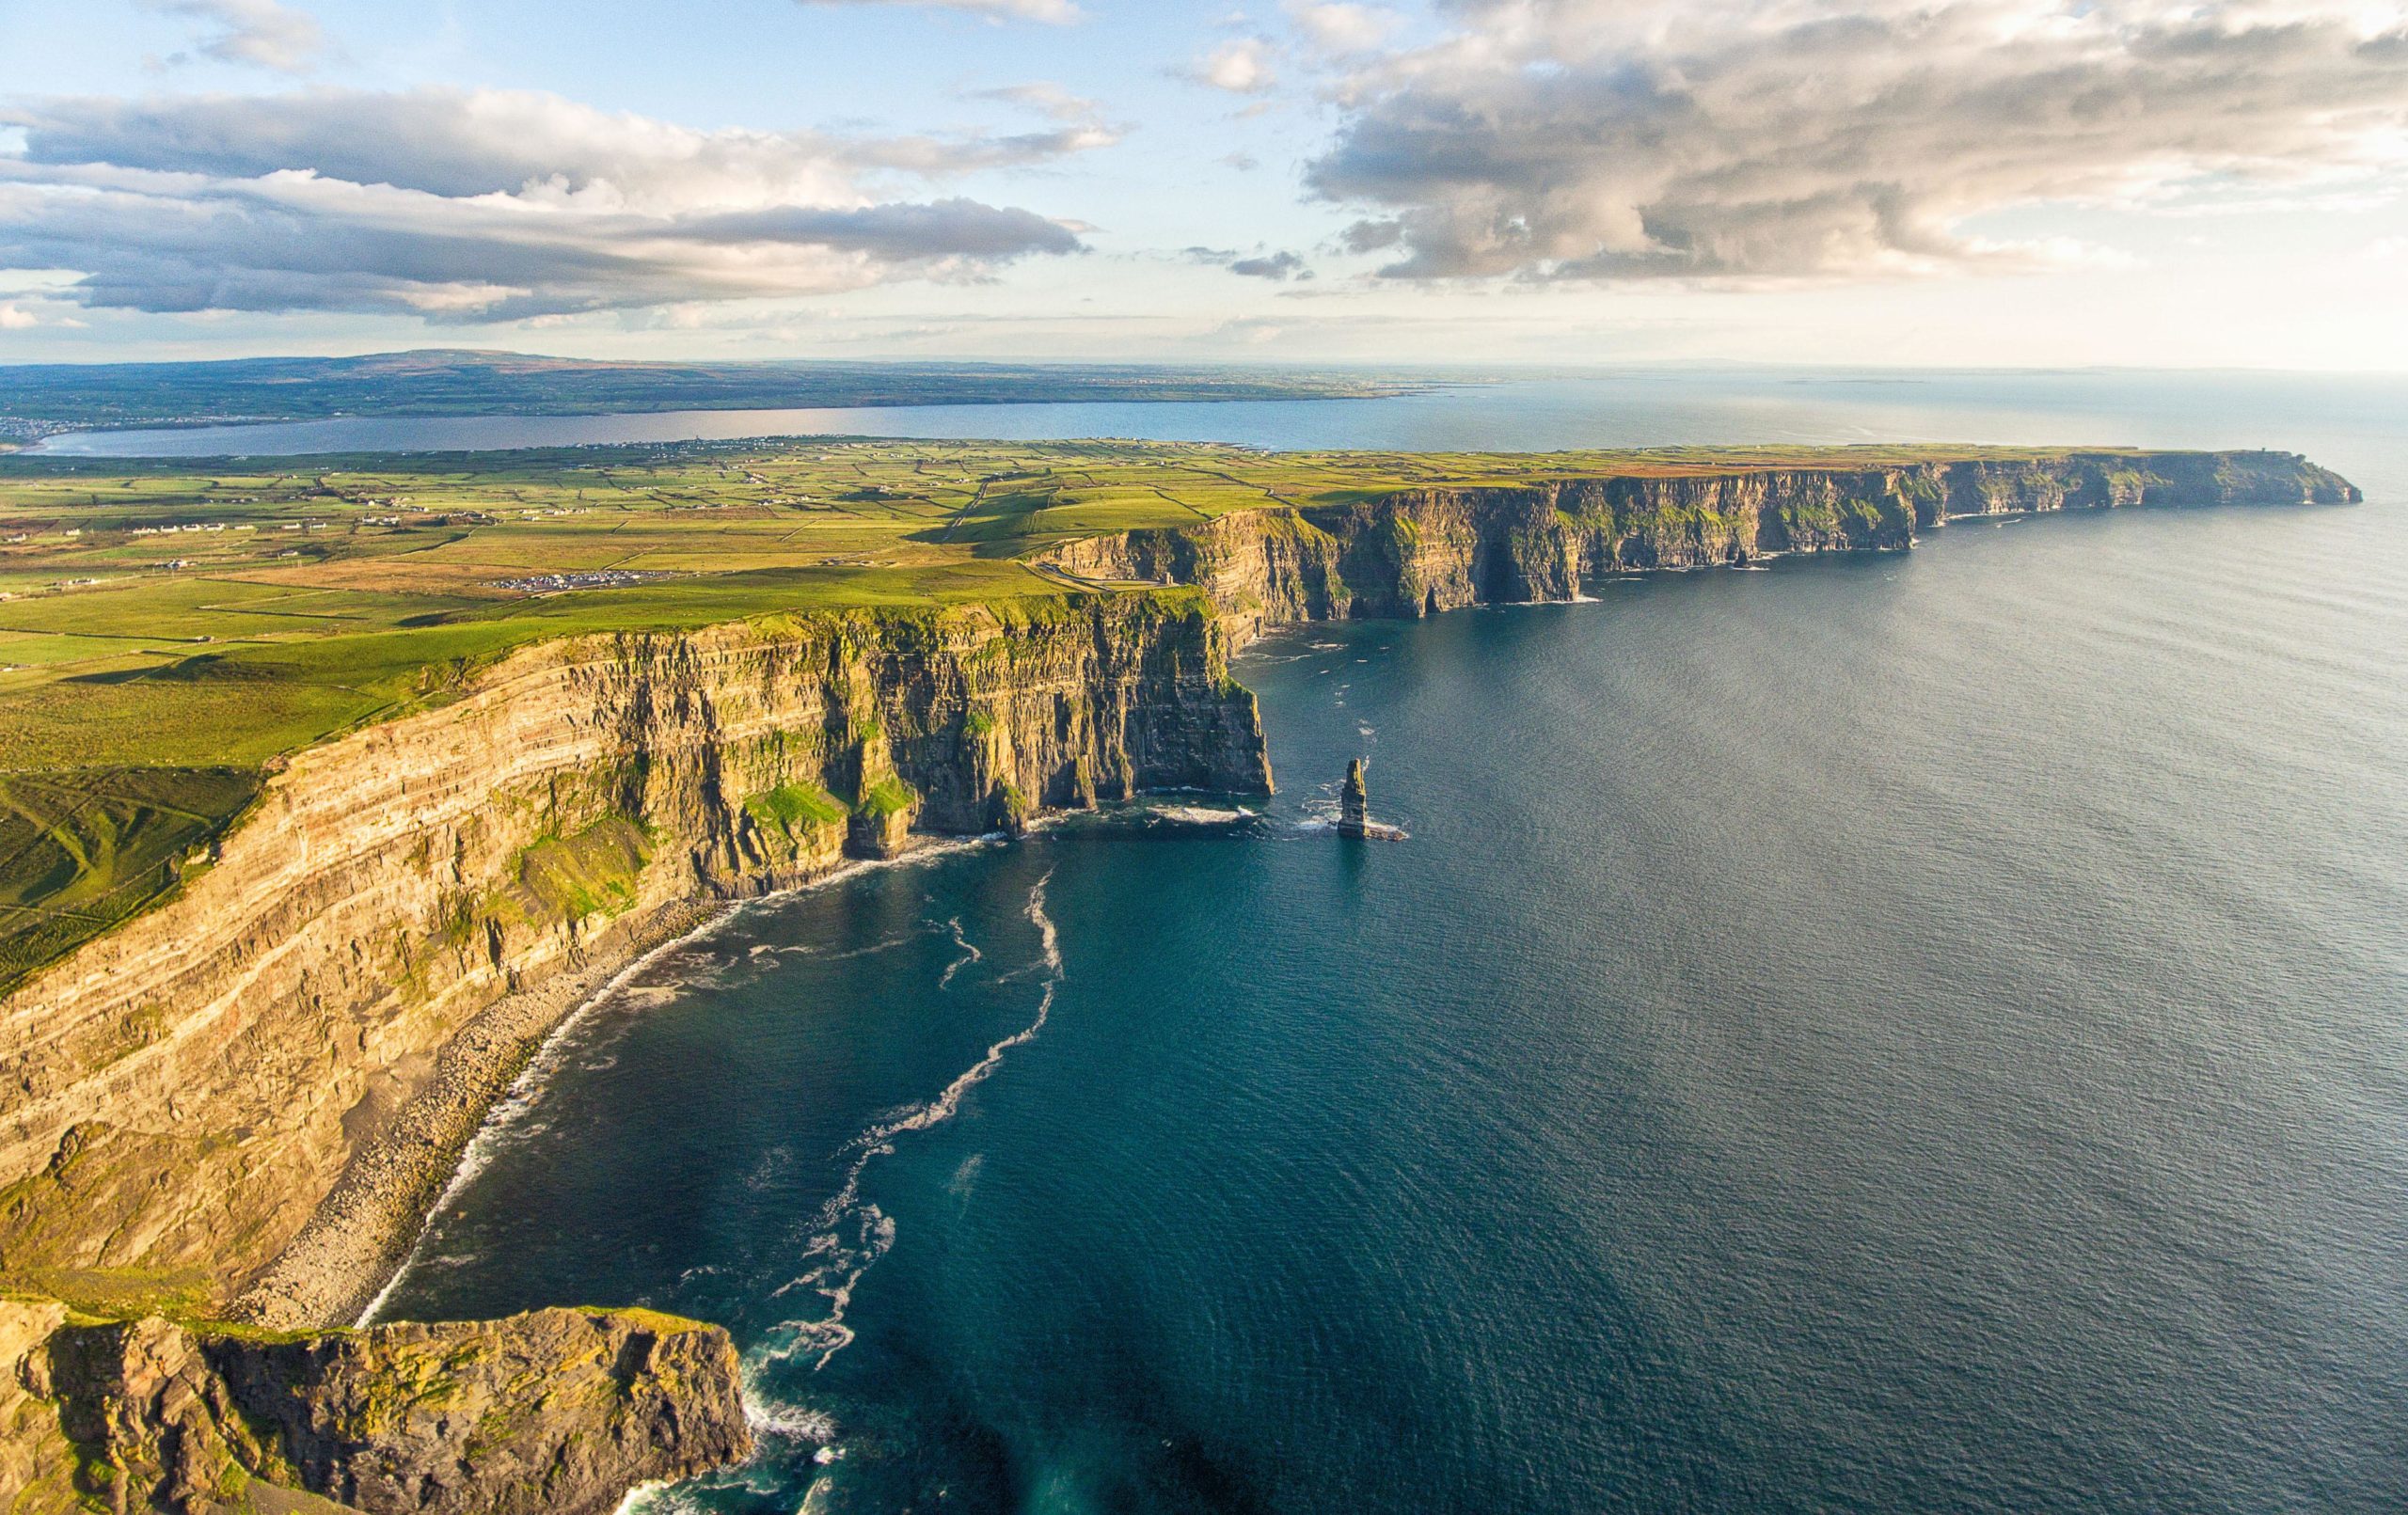 The 10 Best Ireland Tours For 2021 (With Prices) - Tripadvisor